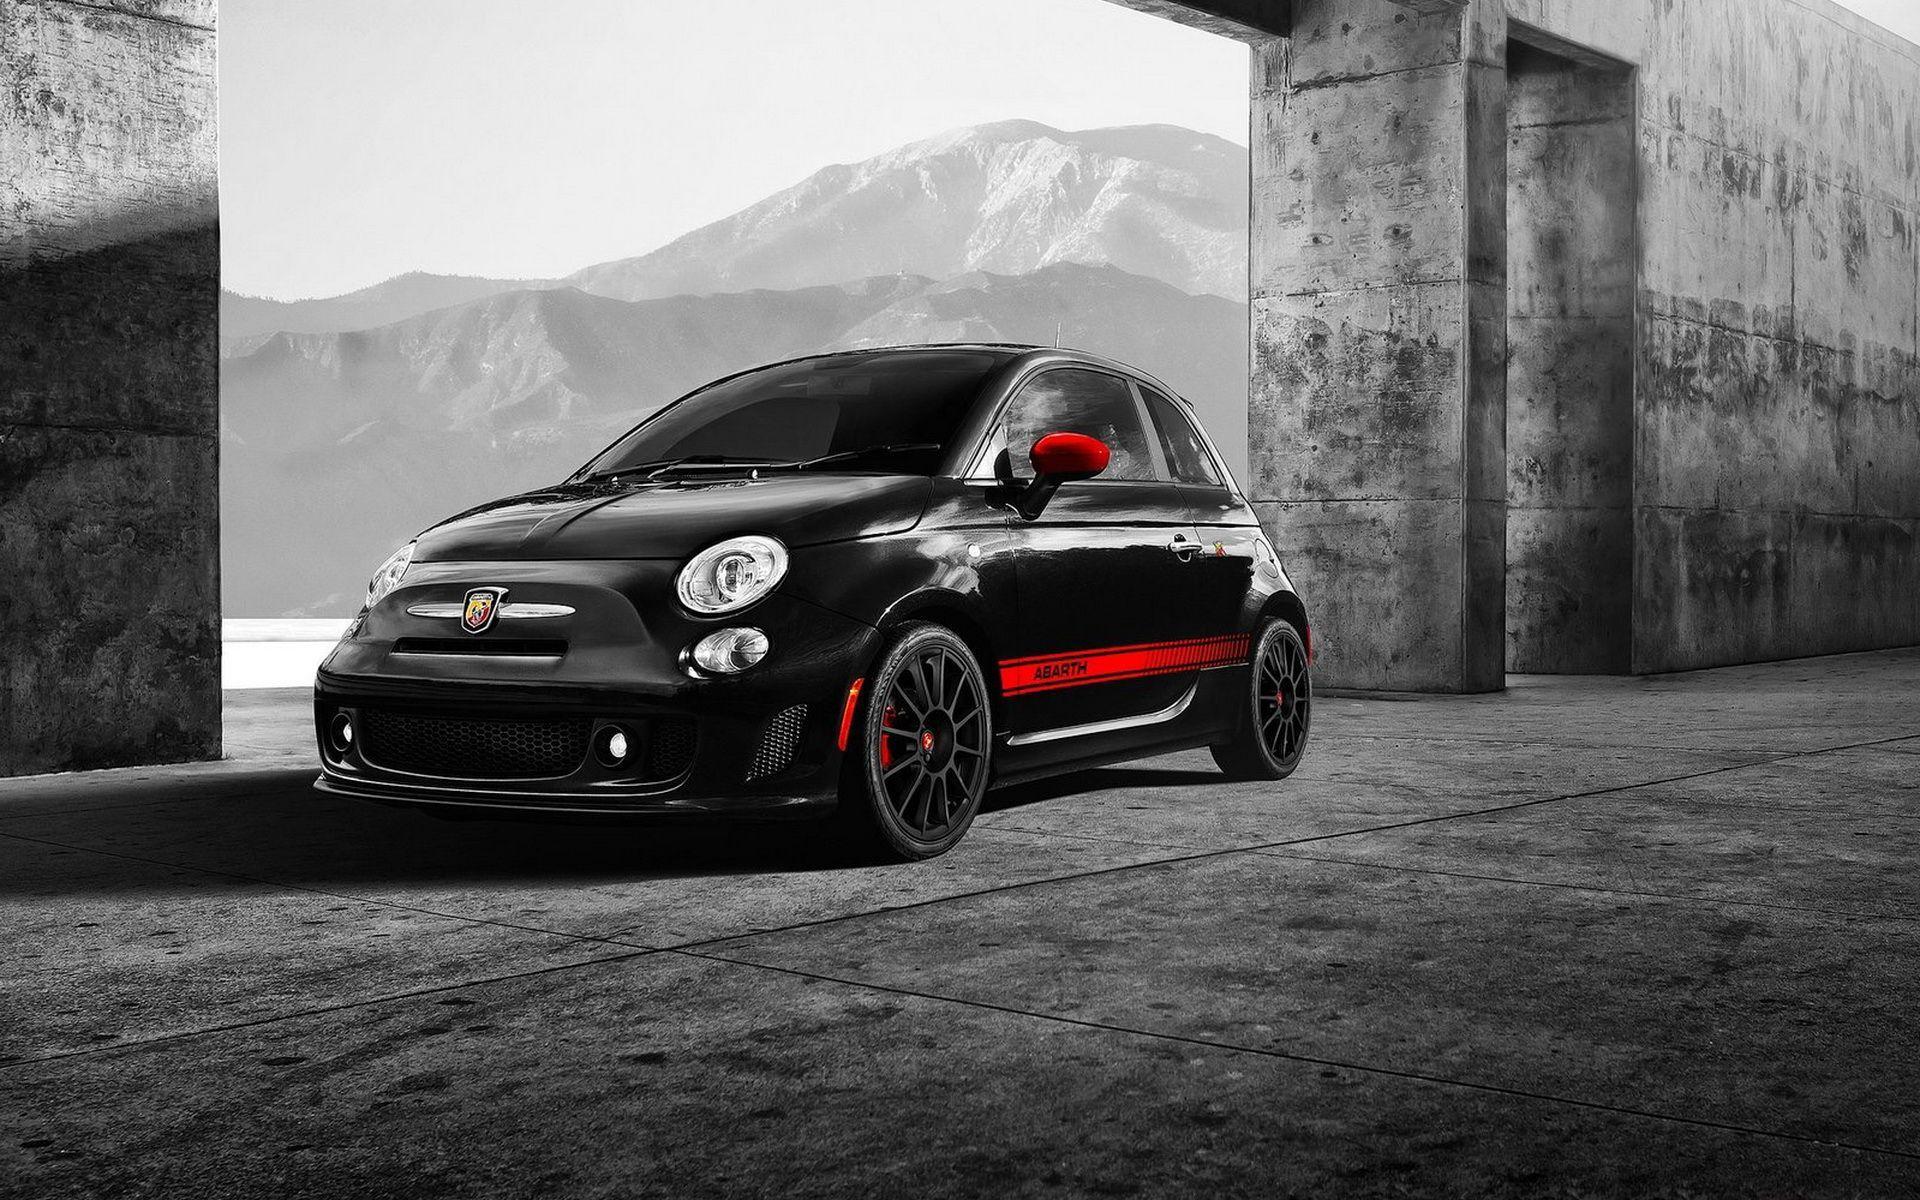 Fiat-500 Abarth Wallpapers And Images - 2019 Fiat 500 Abarth , HD Wallpaper & Backgrounds